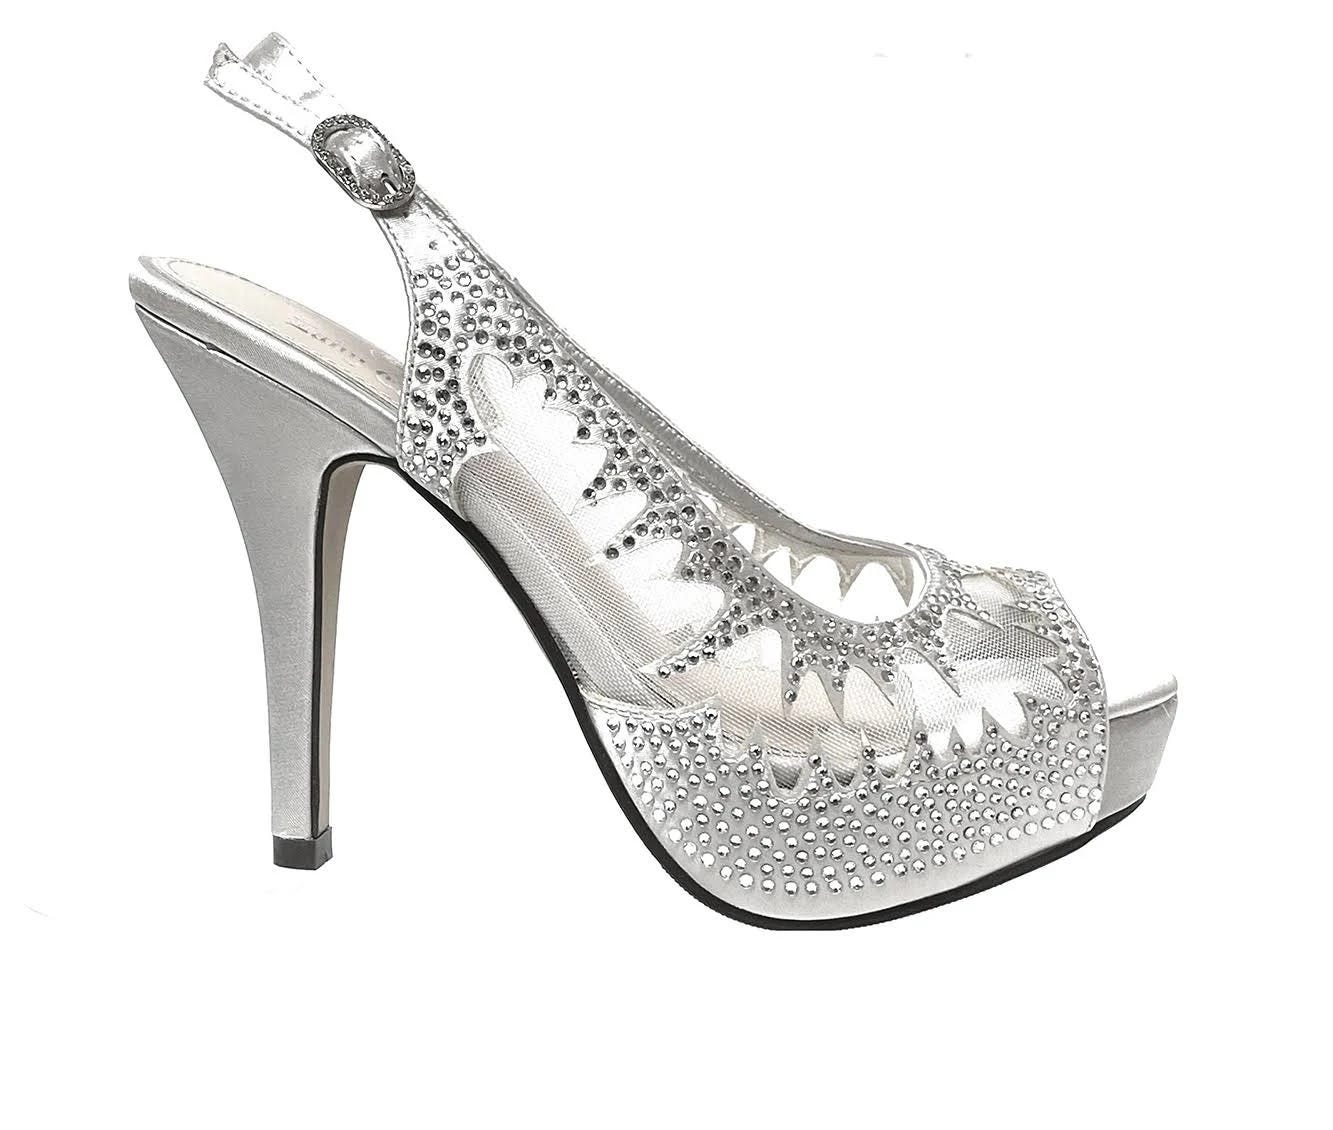 Luxurious Silver Platform Sandals for Wedding Guests | Image